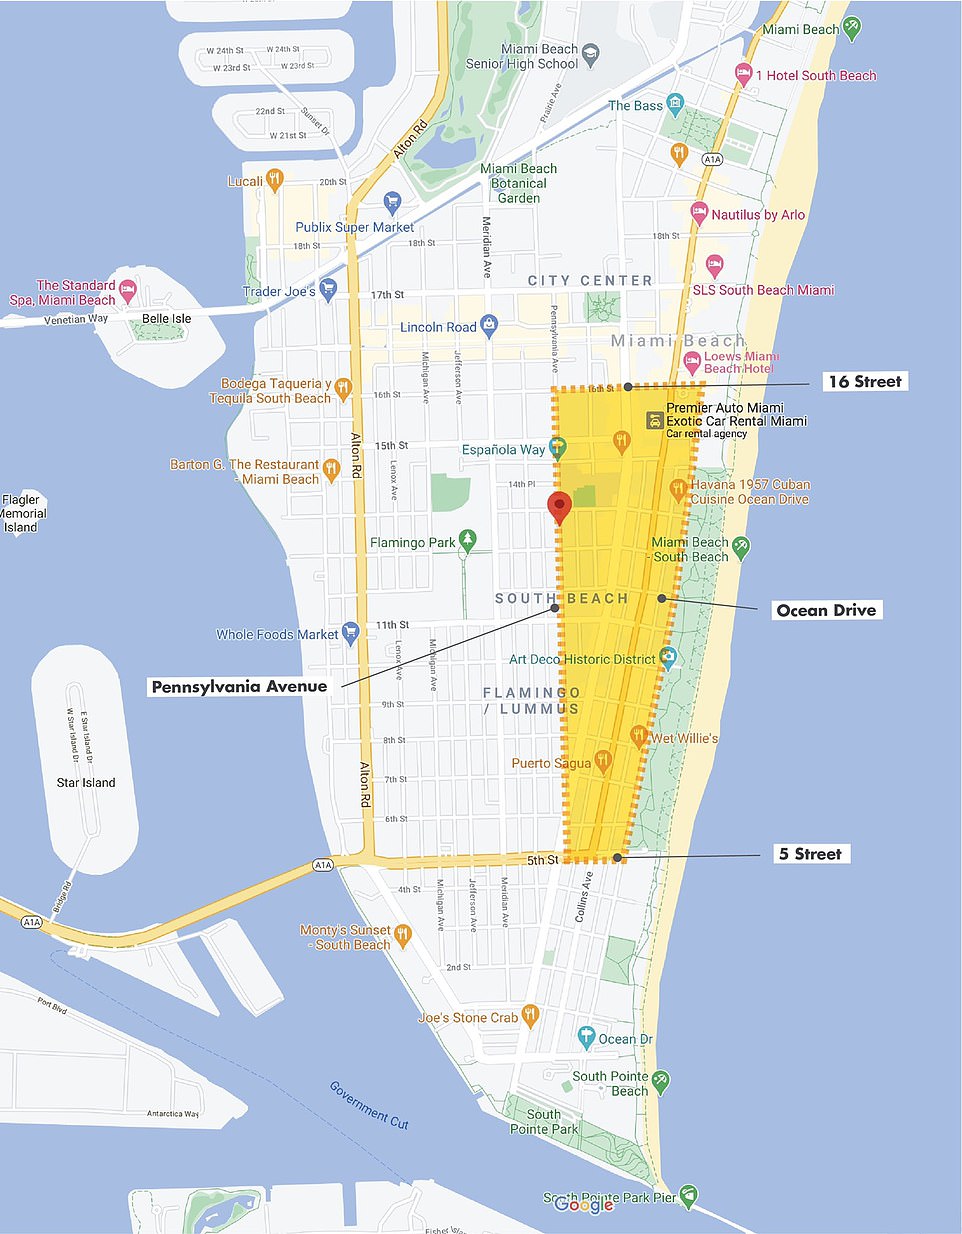 Curfew was imposed on the entertainment district in Miami Beach